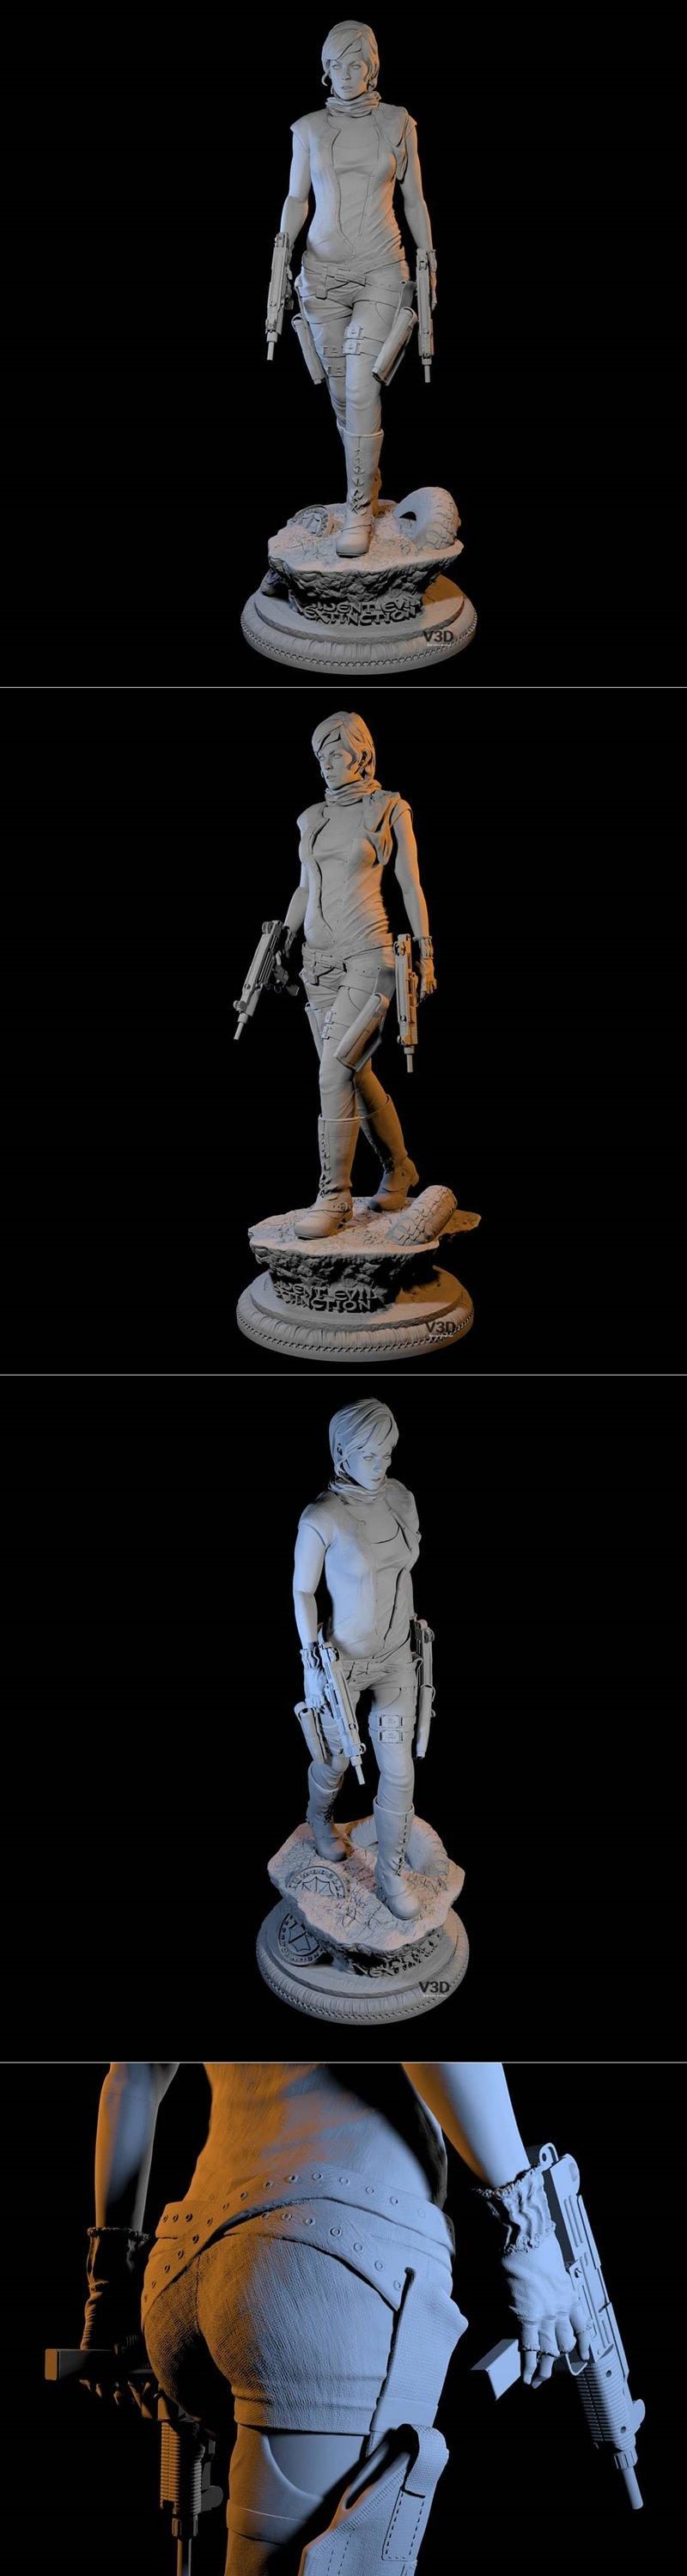 ﻿Alice From Resident Evill – 3D Print